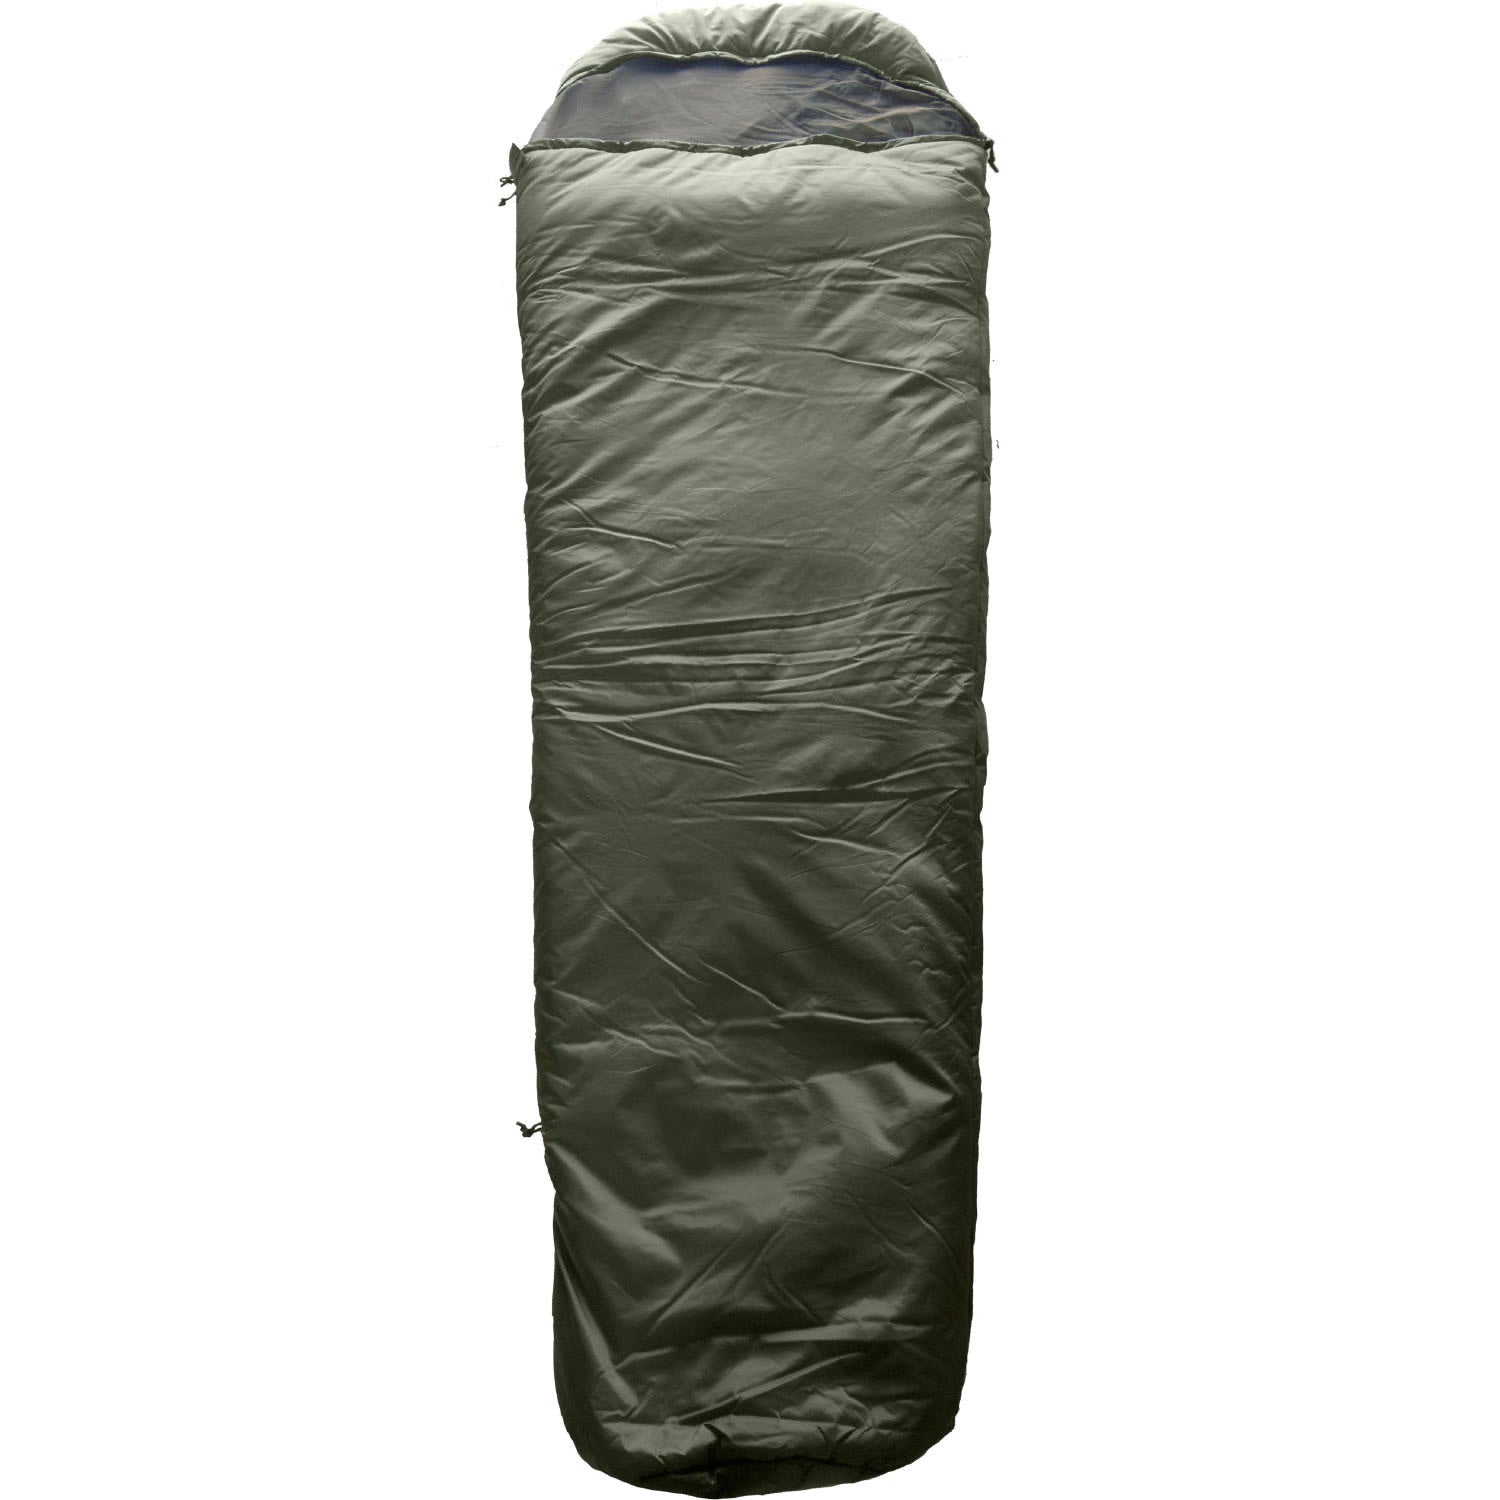 To get some of the best products on the market, you must find good brands and this sleeping bag doesn't disappoint.  0 degree rated military specification sleeping bag  2000mm water head rating  Reinforced oxford inner liner for boots  Box foot/nylon base/ 2 x YKK zips  Rip-stop nylon upper  Anti-bacterial aluminate mesh liner with microfibre fill  Size: 235x80x50cm